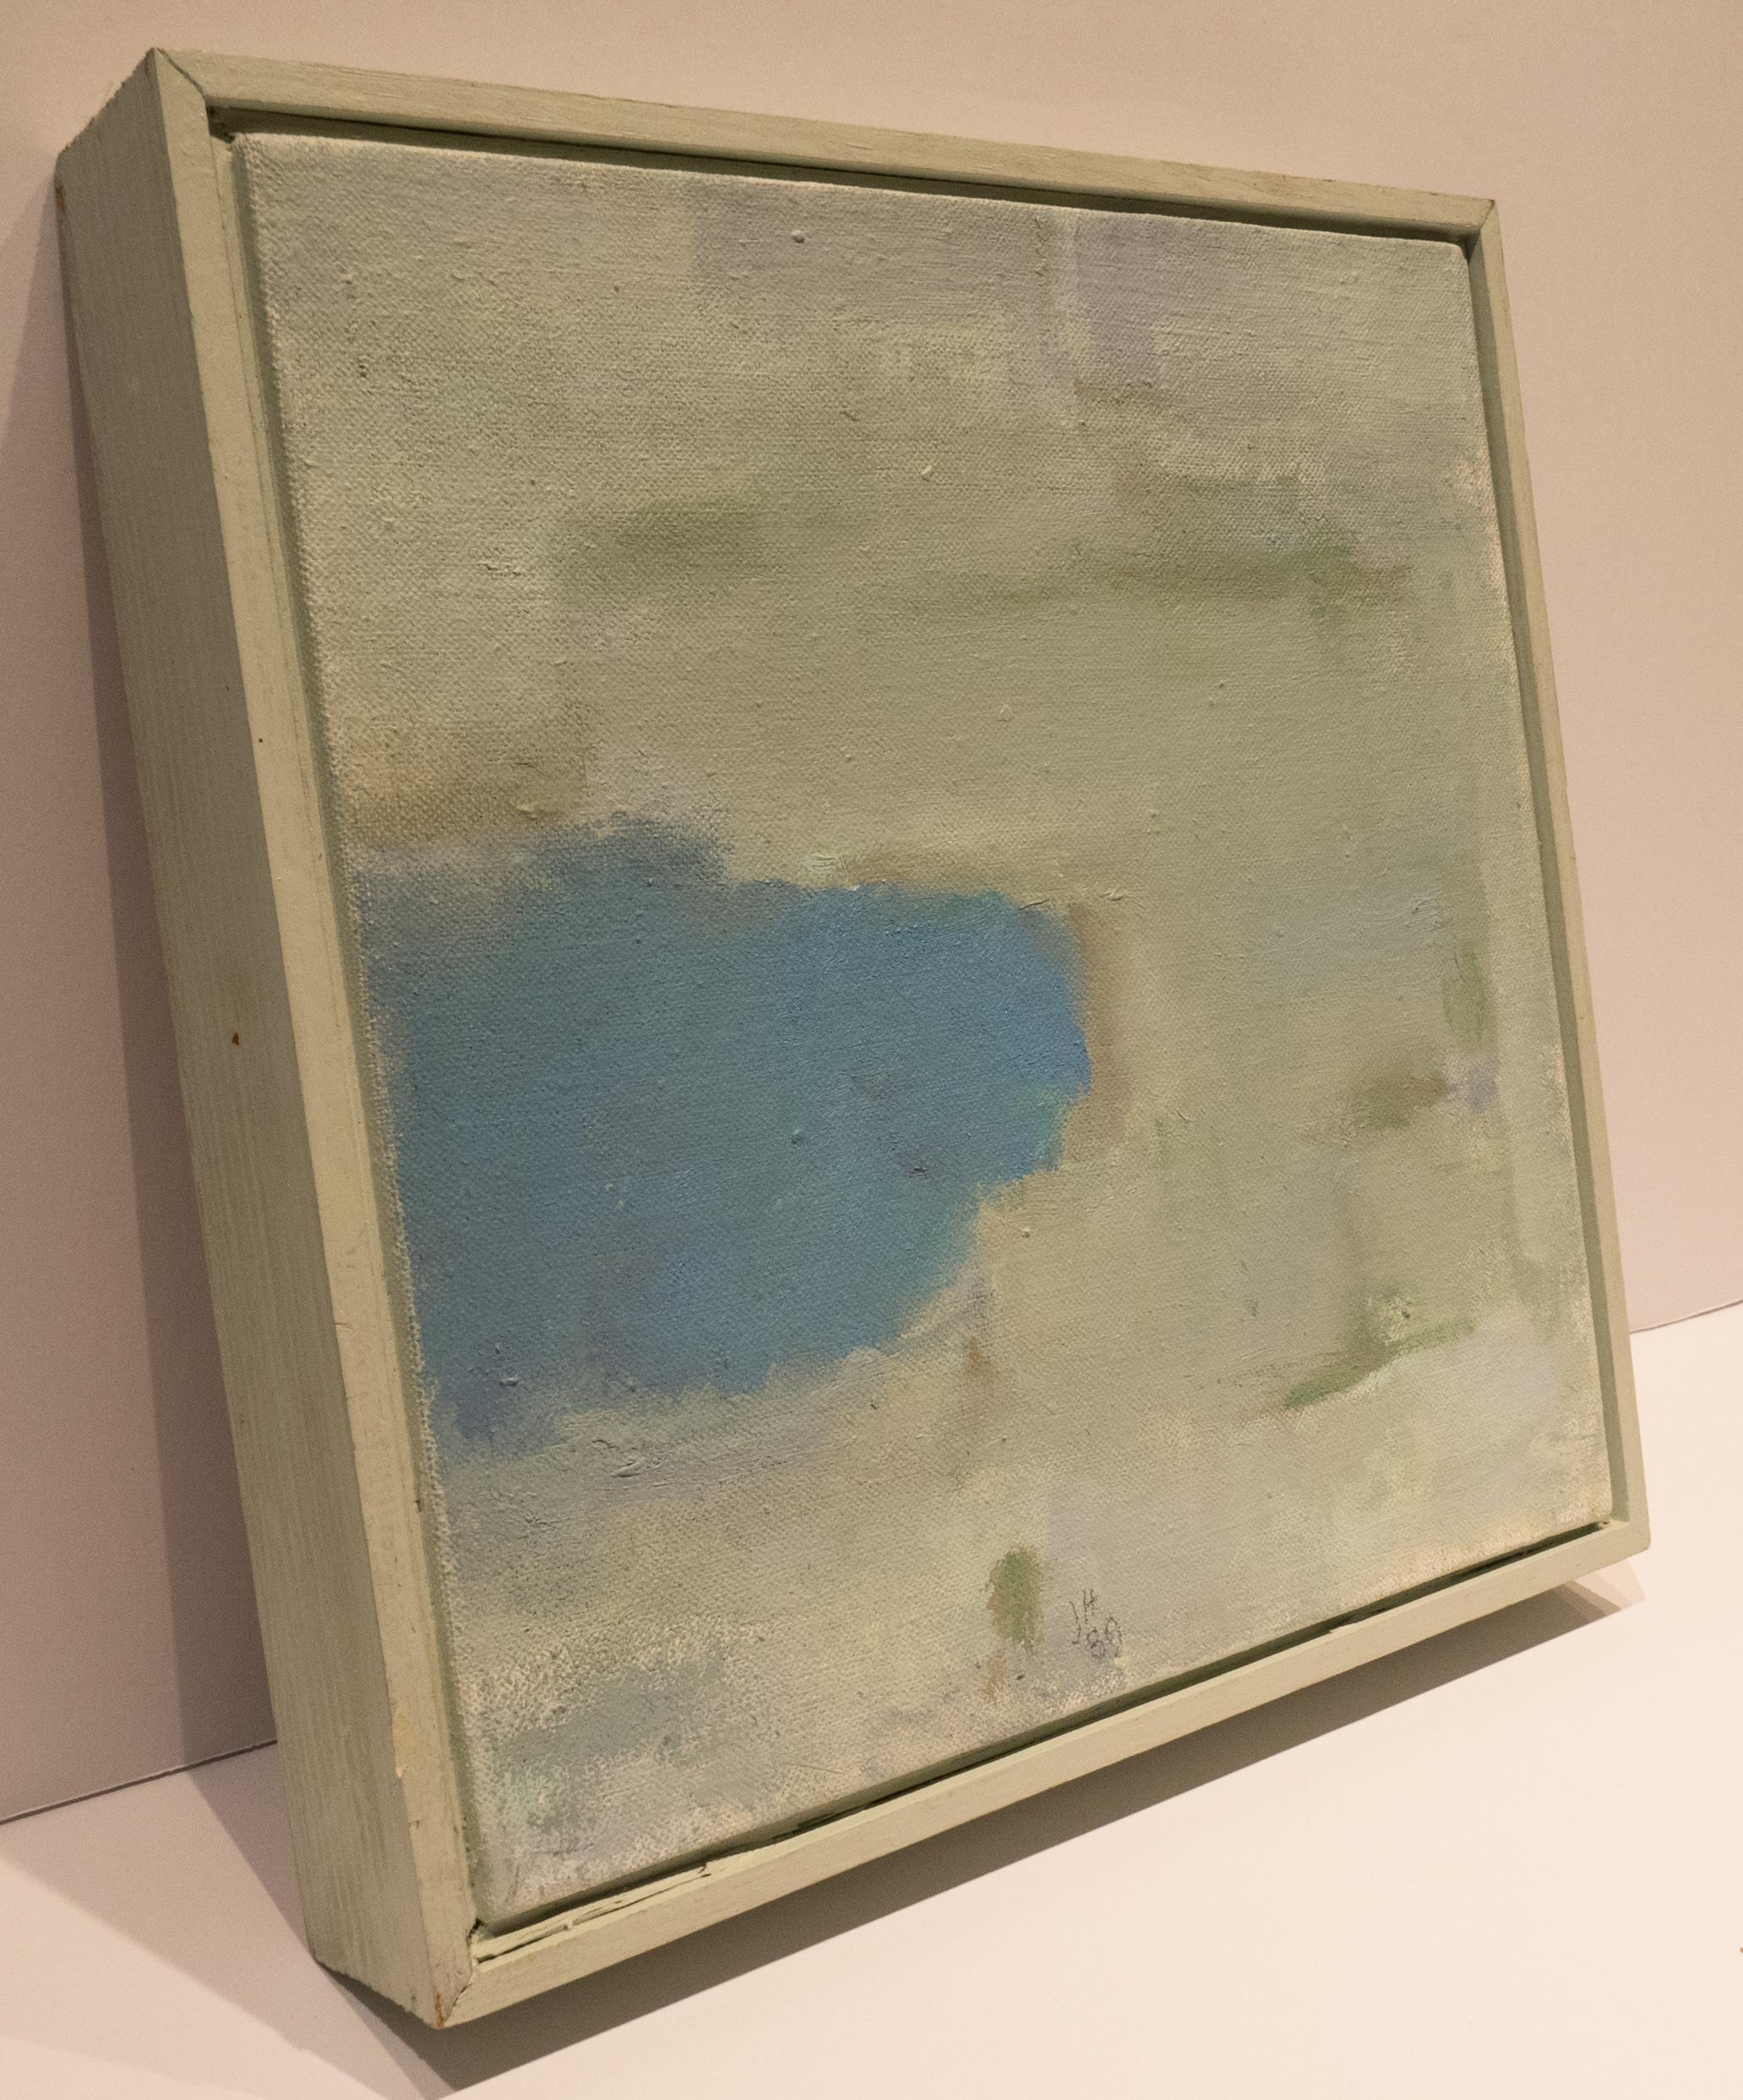 Oil on canvas in original painted frame, in a style that might be described as abstract impressionist, by artist and educator John Hartell (1902-1995). Dated 1989 and with a partial label from Kraushaar Gallery in New York City, where he exhibited